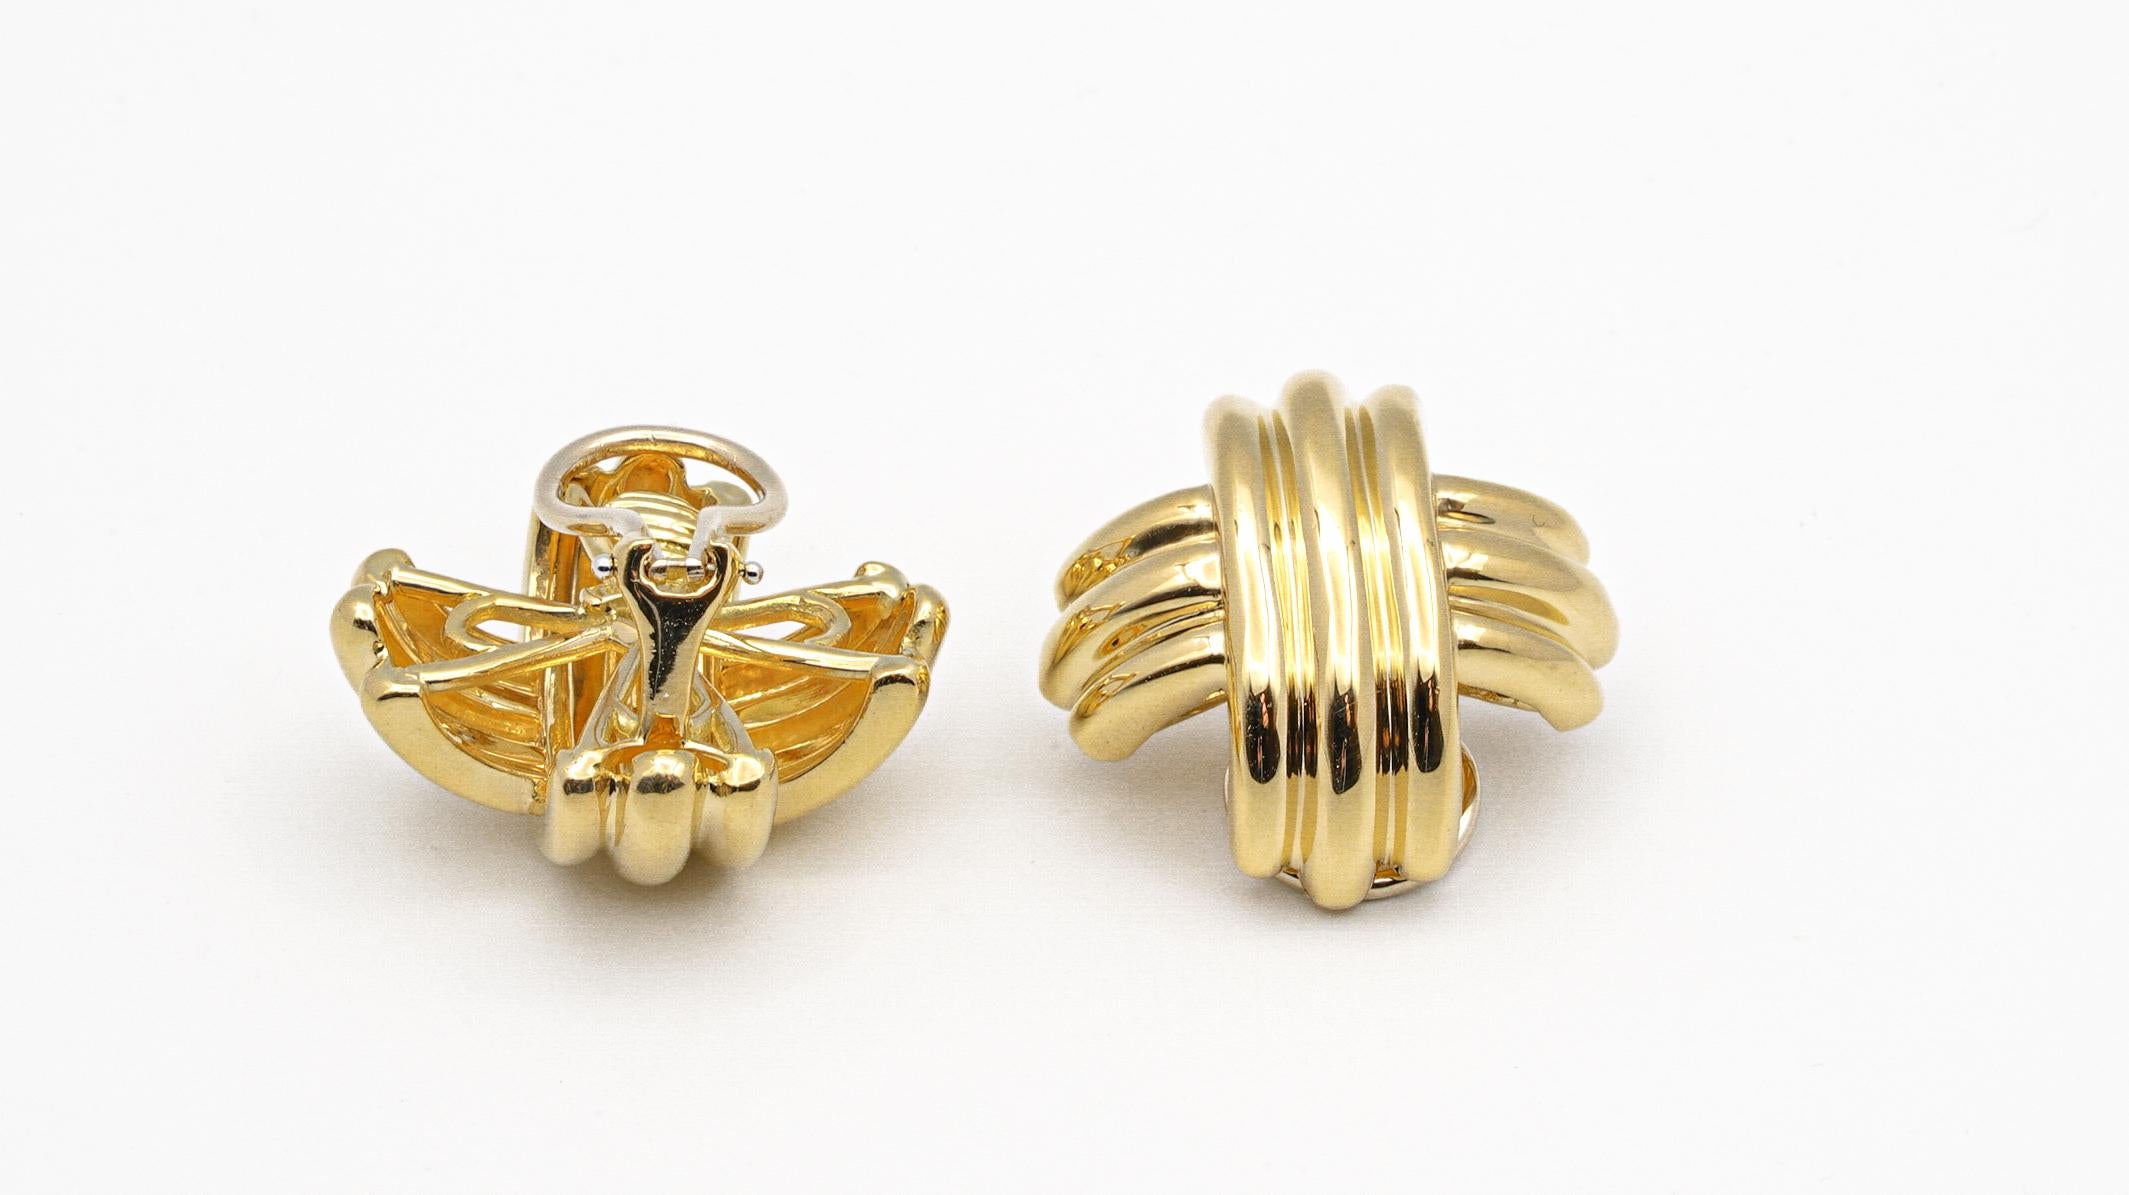 Vintage Tiffany & Co. X-form earrings finely crafted in 18 karat yellow gold. Large Omega Clip Backs.
Stamped, 